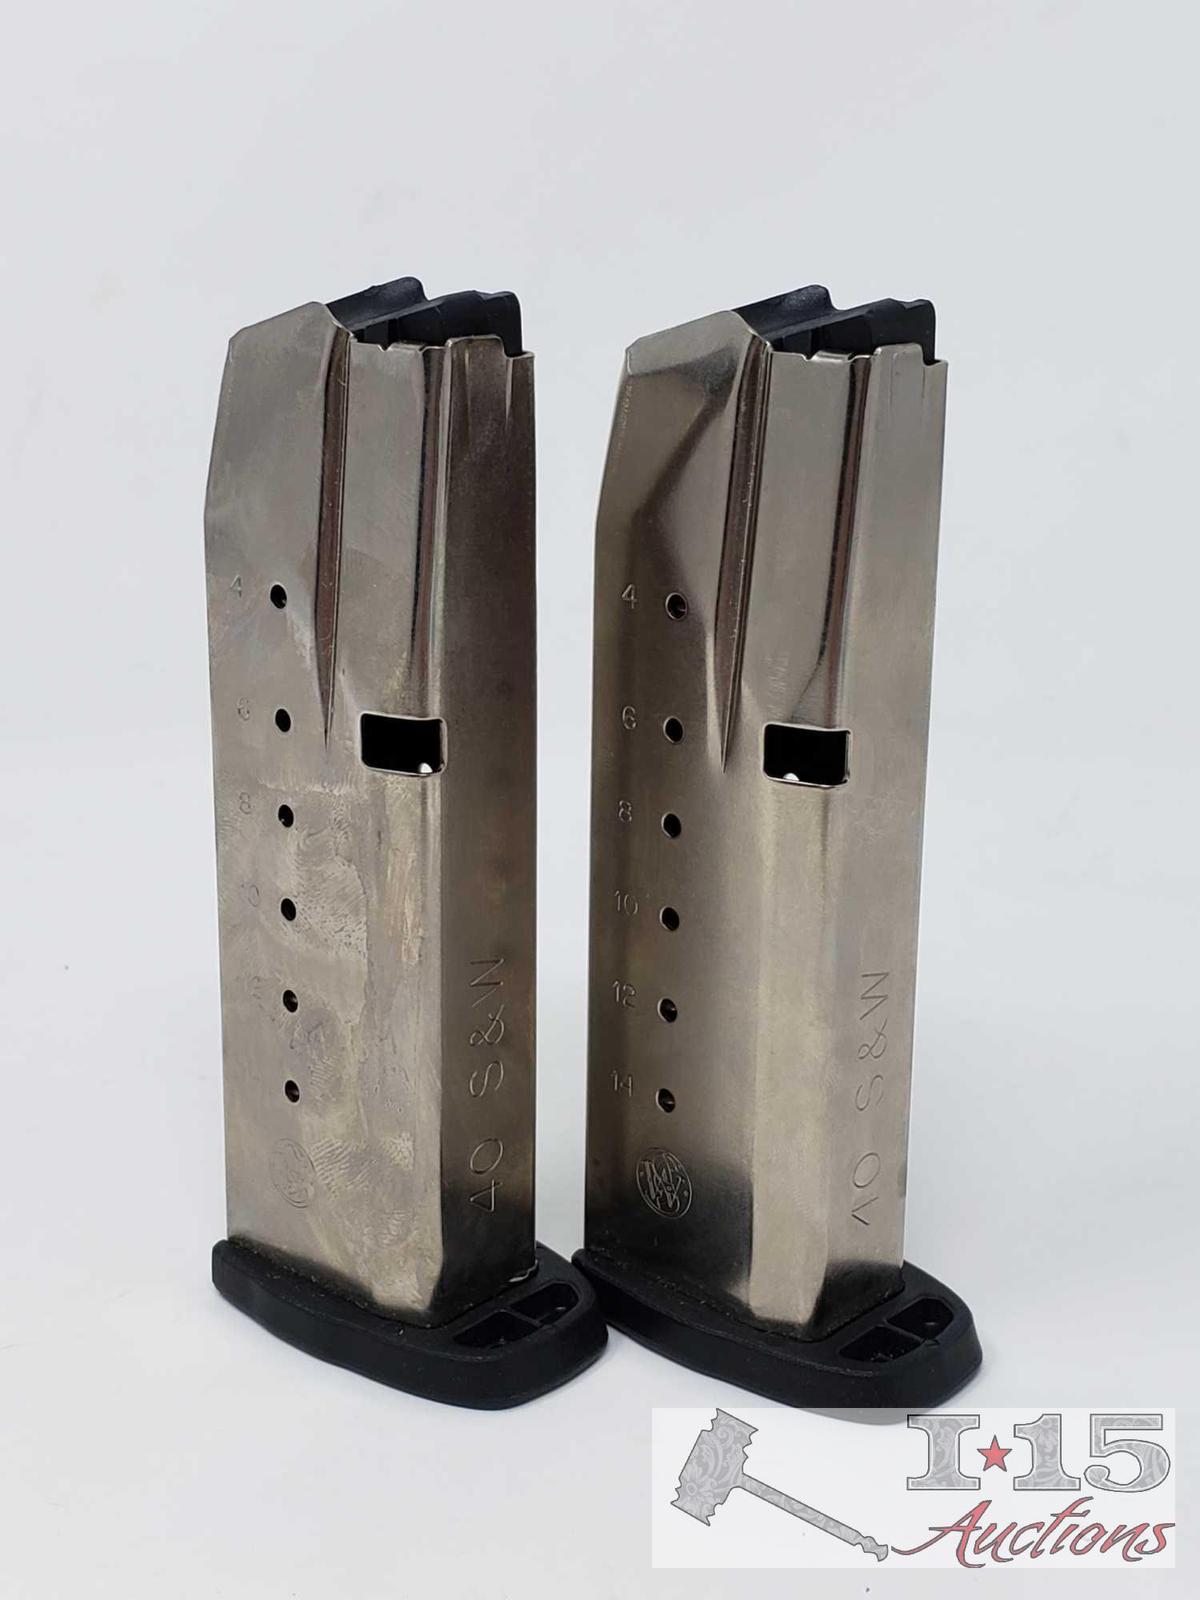 2 Smith & Wesson SD40 VE 16 Round Magazines, Out of State or LEO